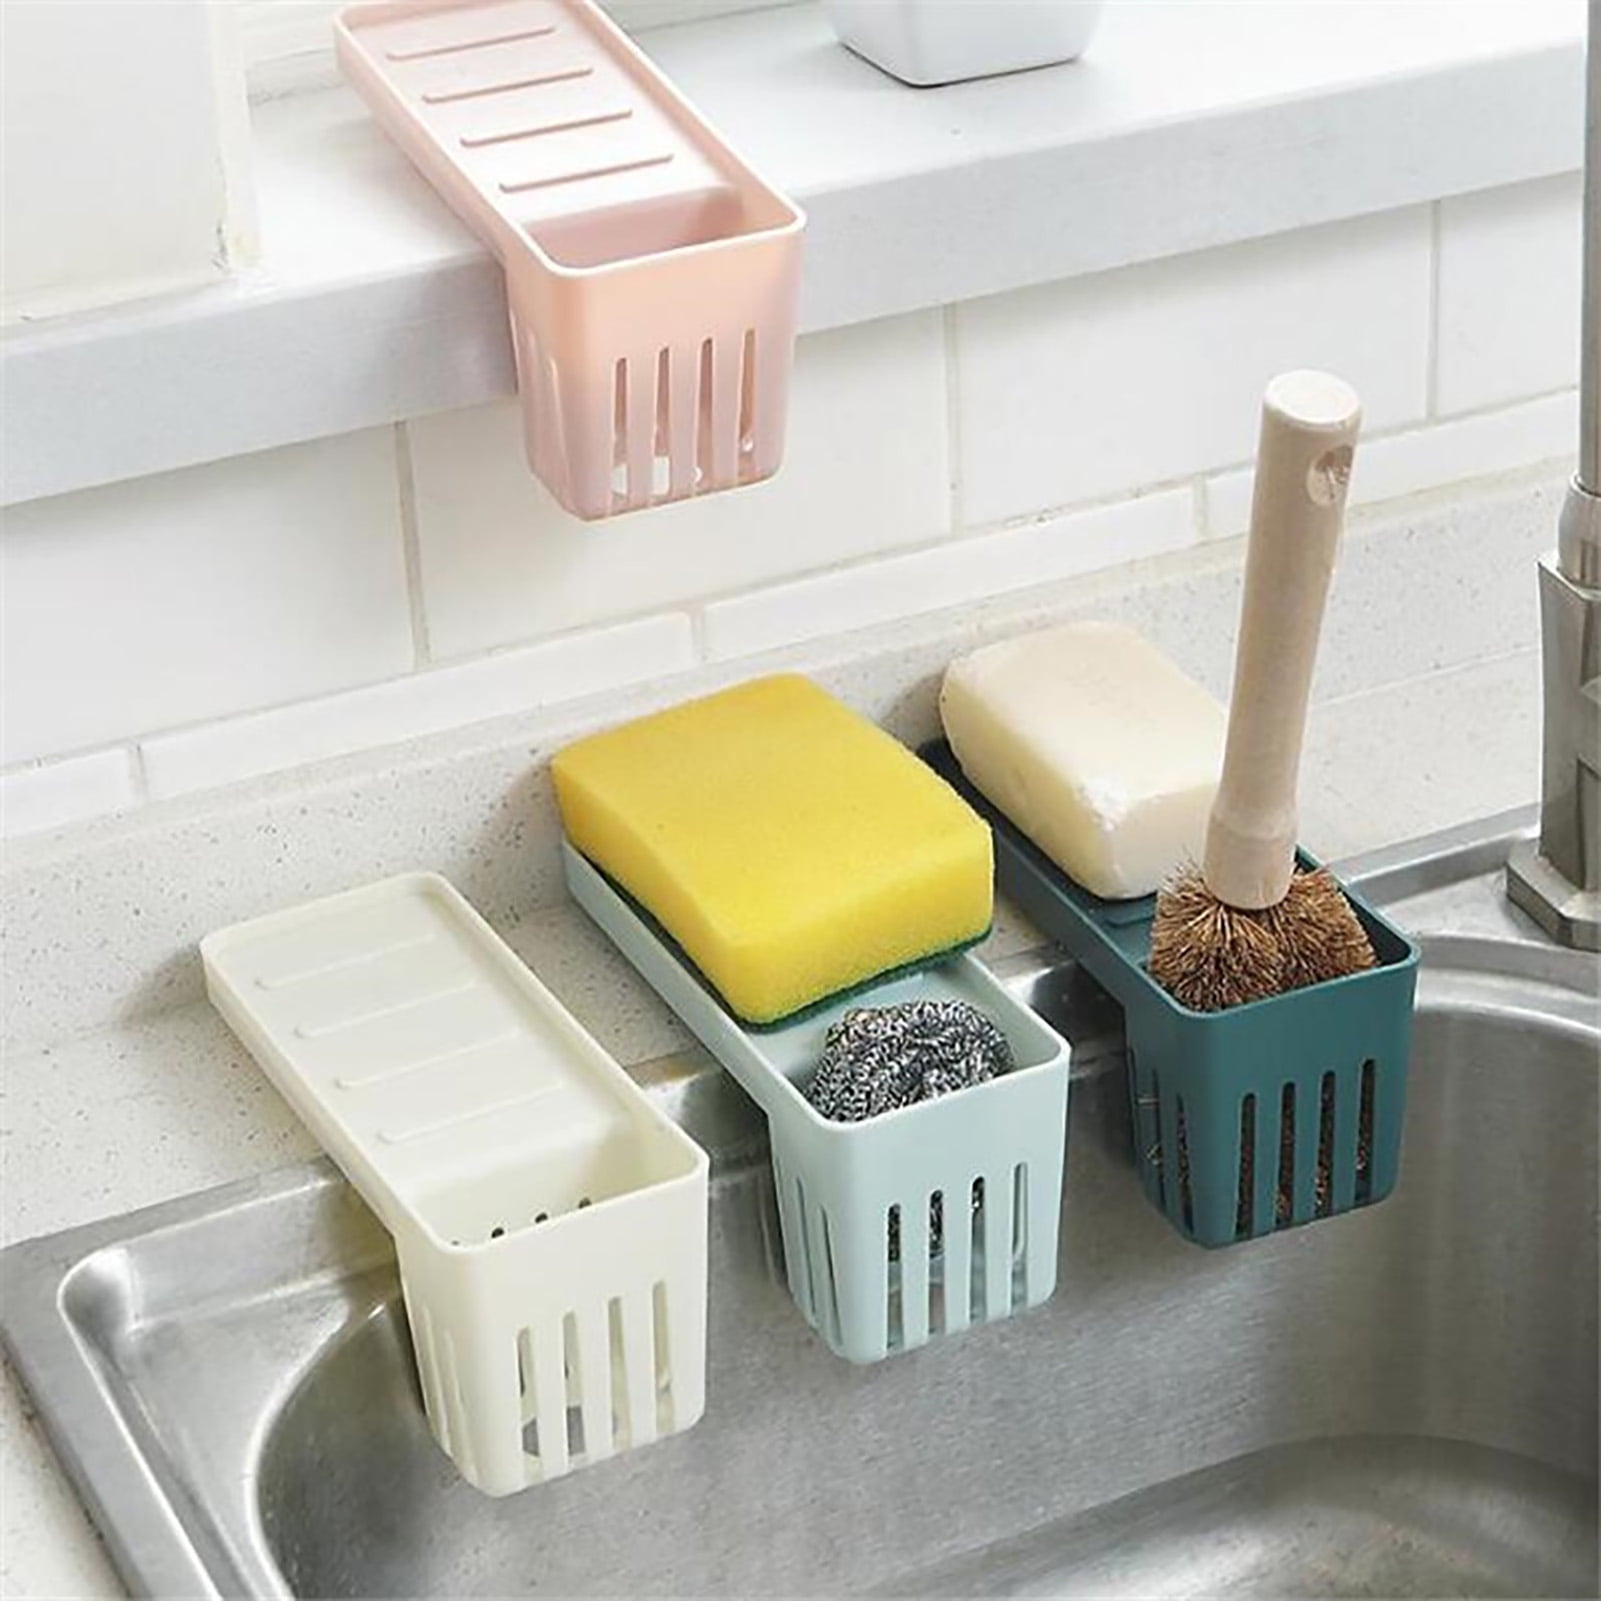 Sink Drain Rack Sponge Soap Storage Holder Quick Drying Suction Cup Classroom 8 